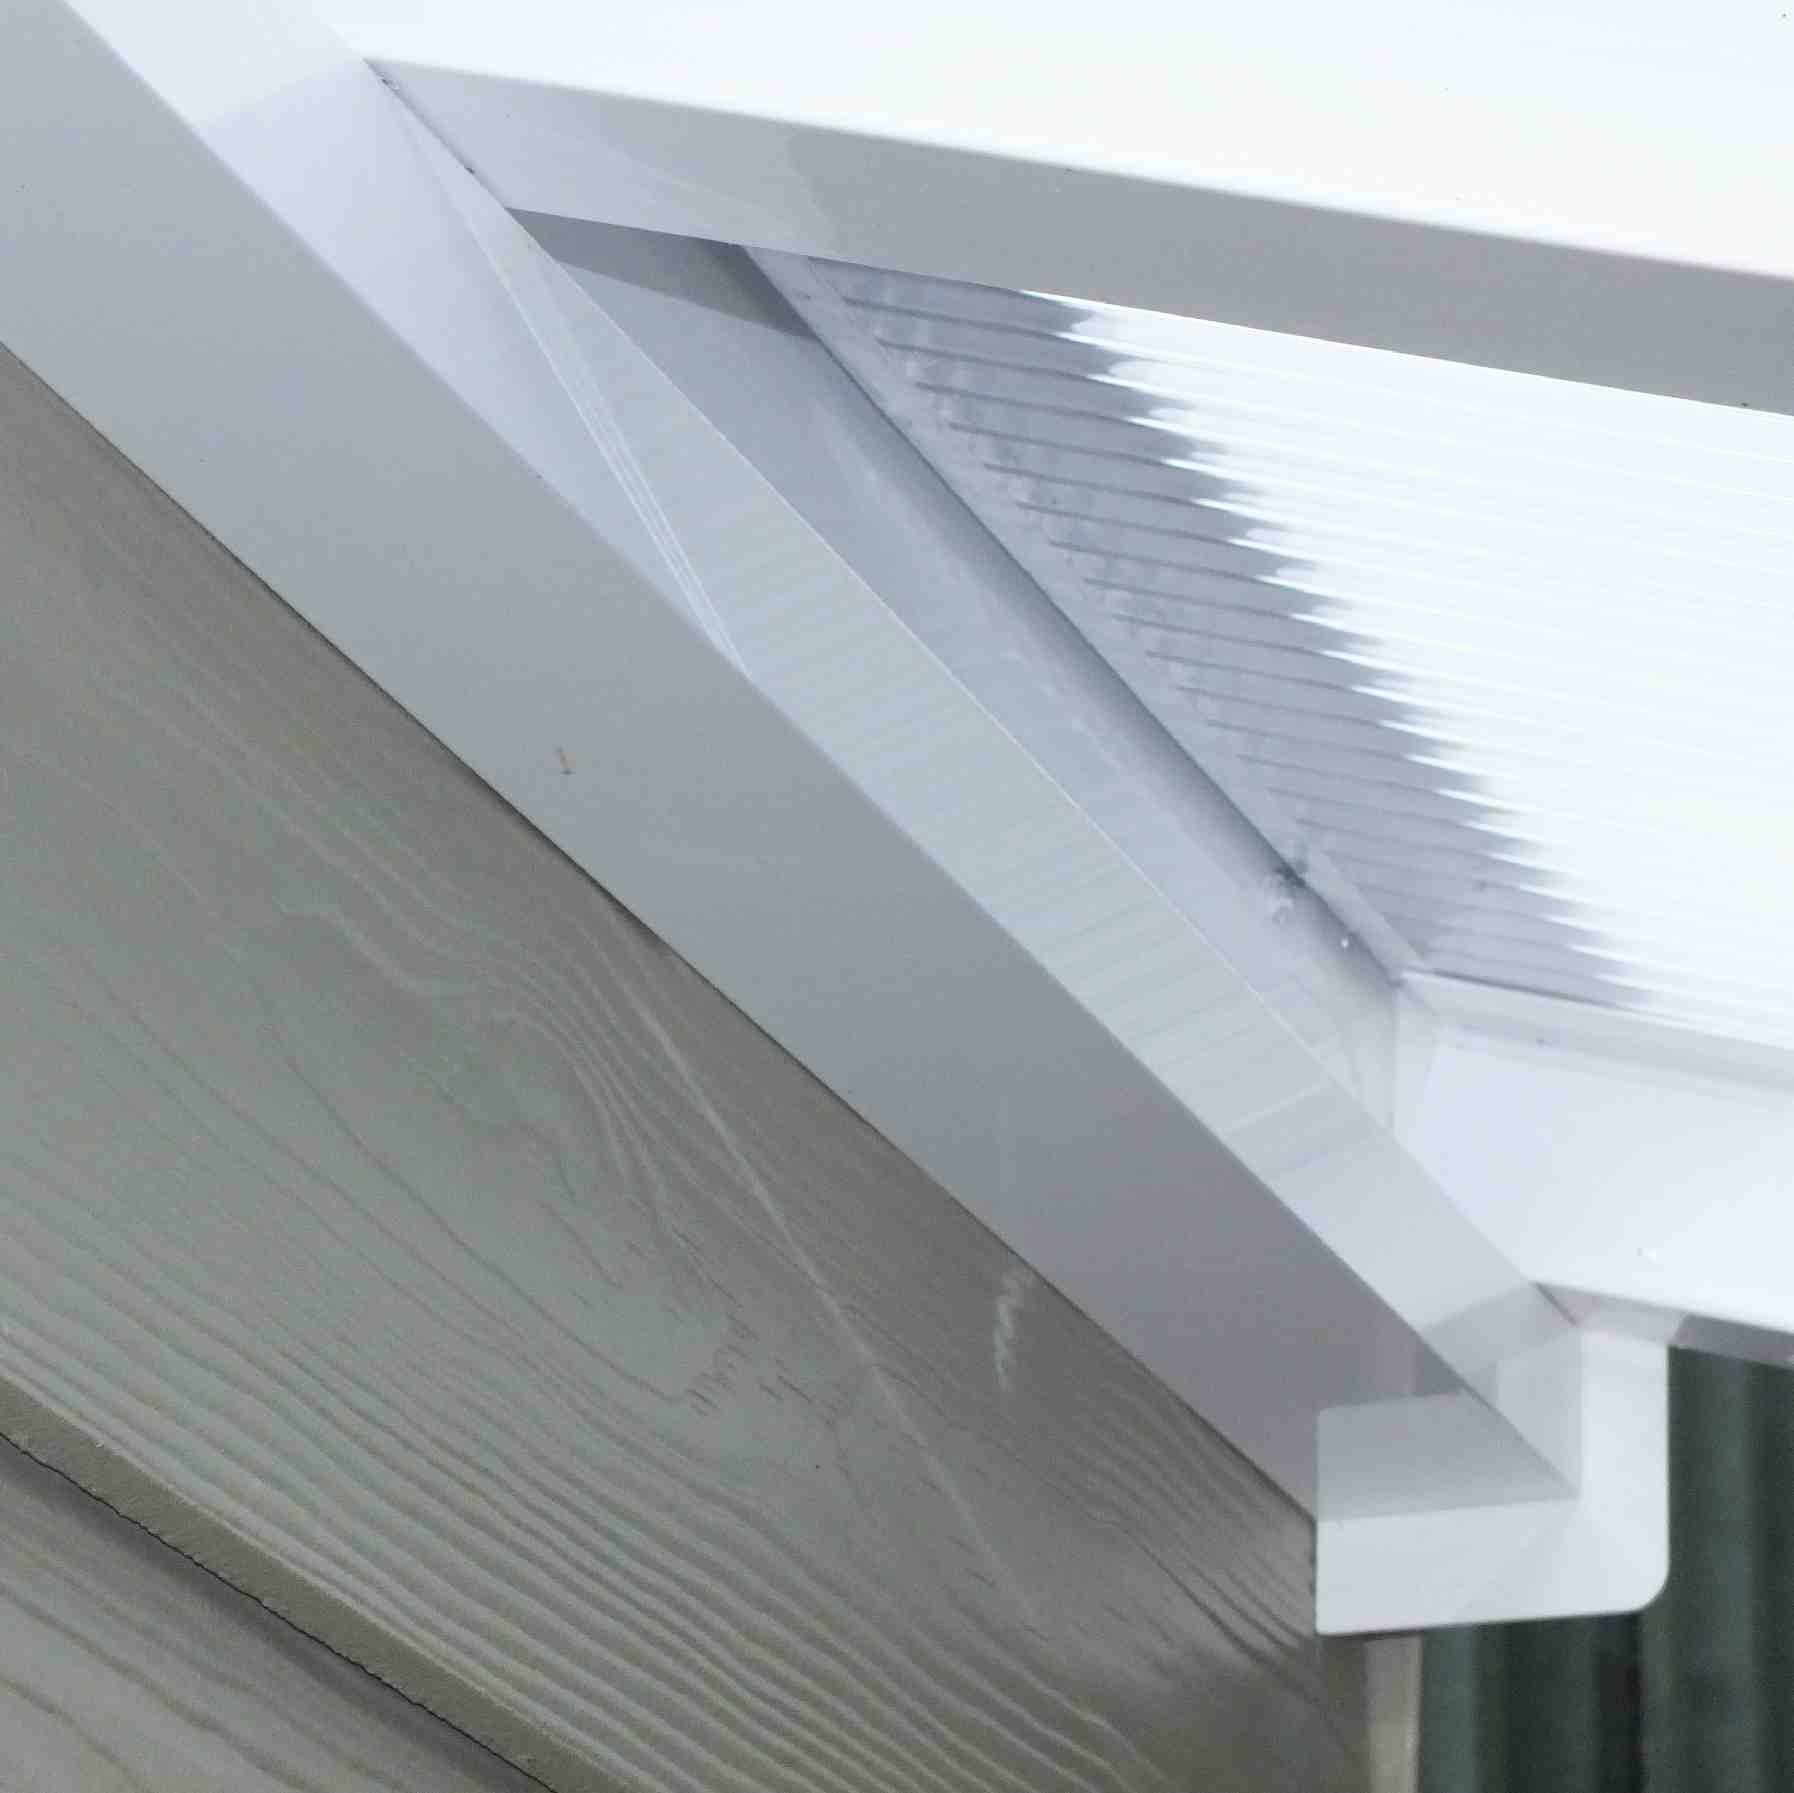 Great deals on Omega Verandah White with 6mm Glass Clear Plate Polycarbonate Glazing - 7.0m (W) x 2.0m (P), (4) Supporting Posts